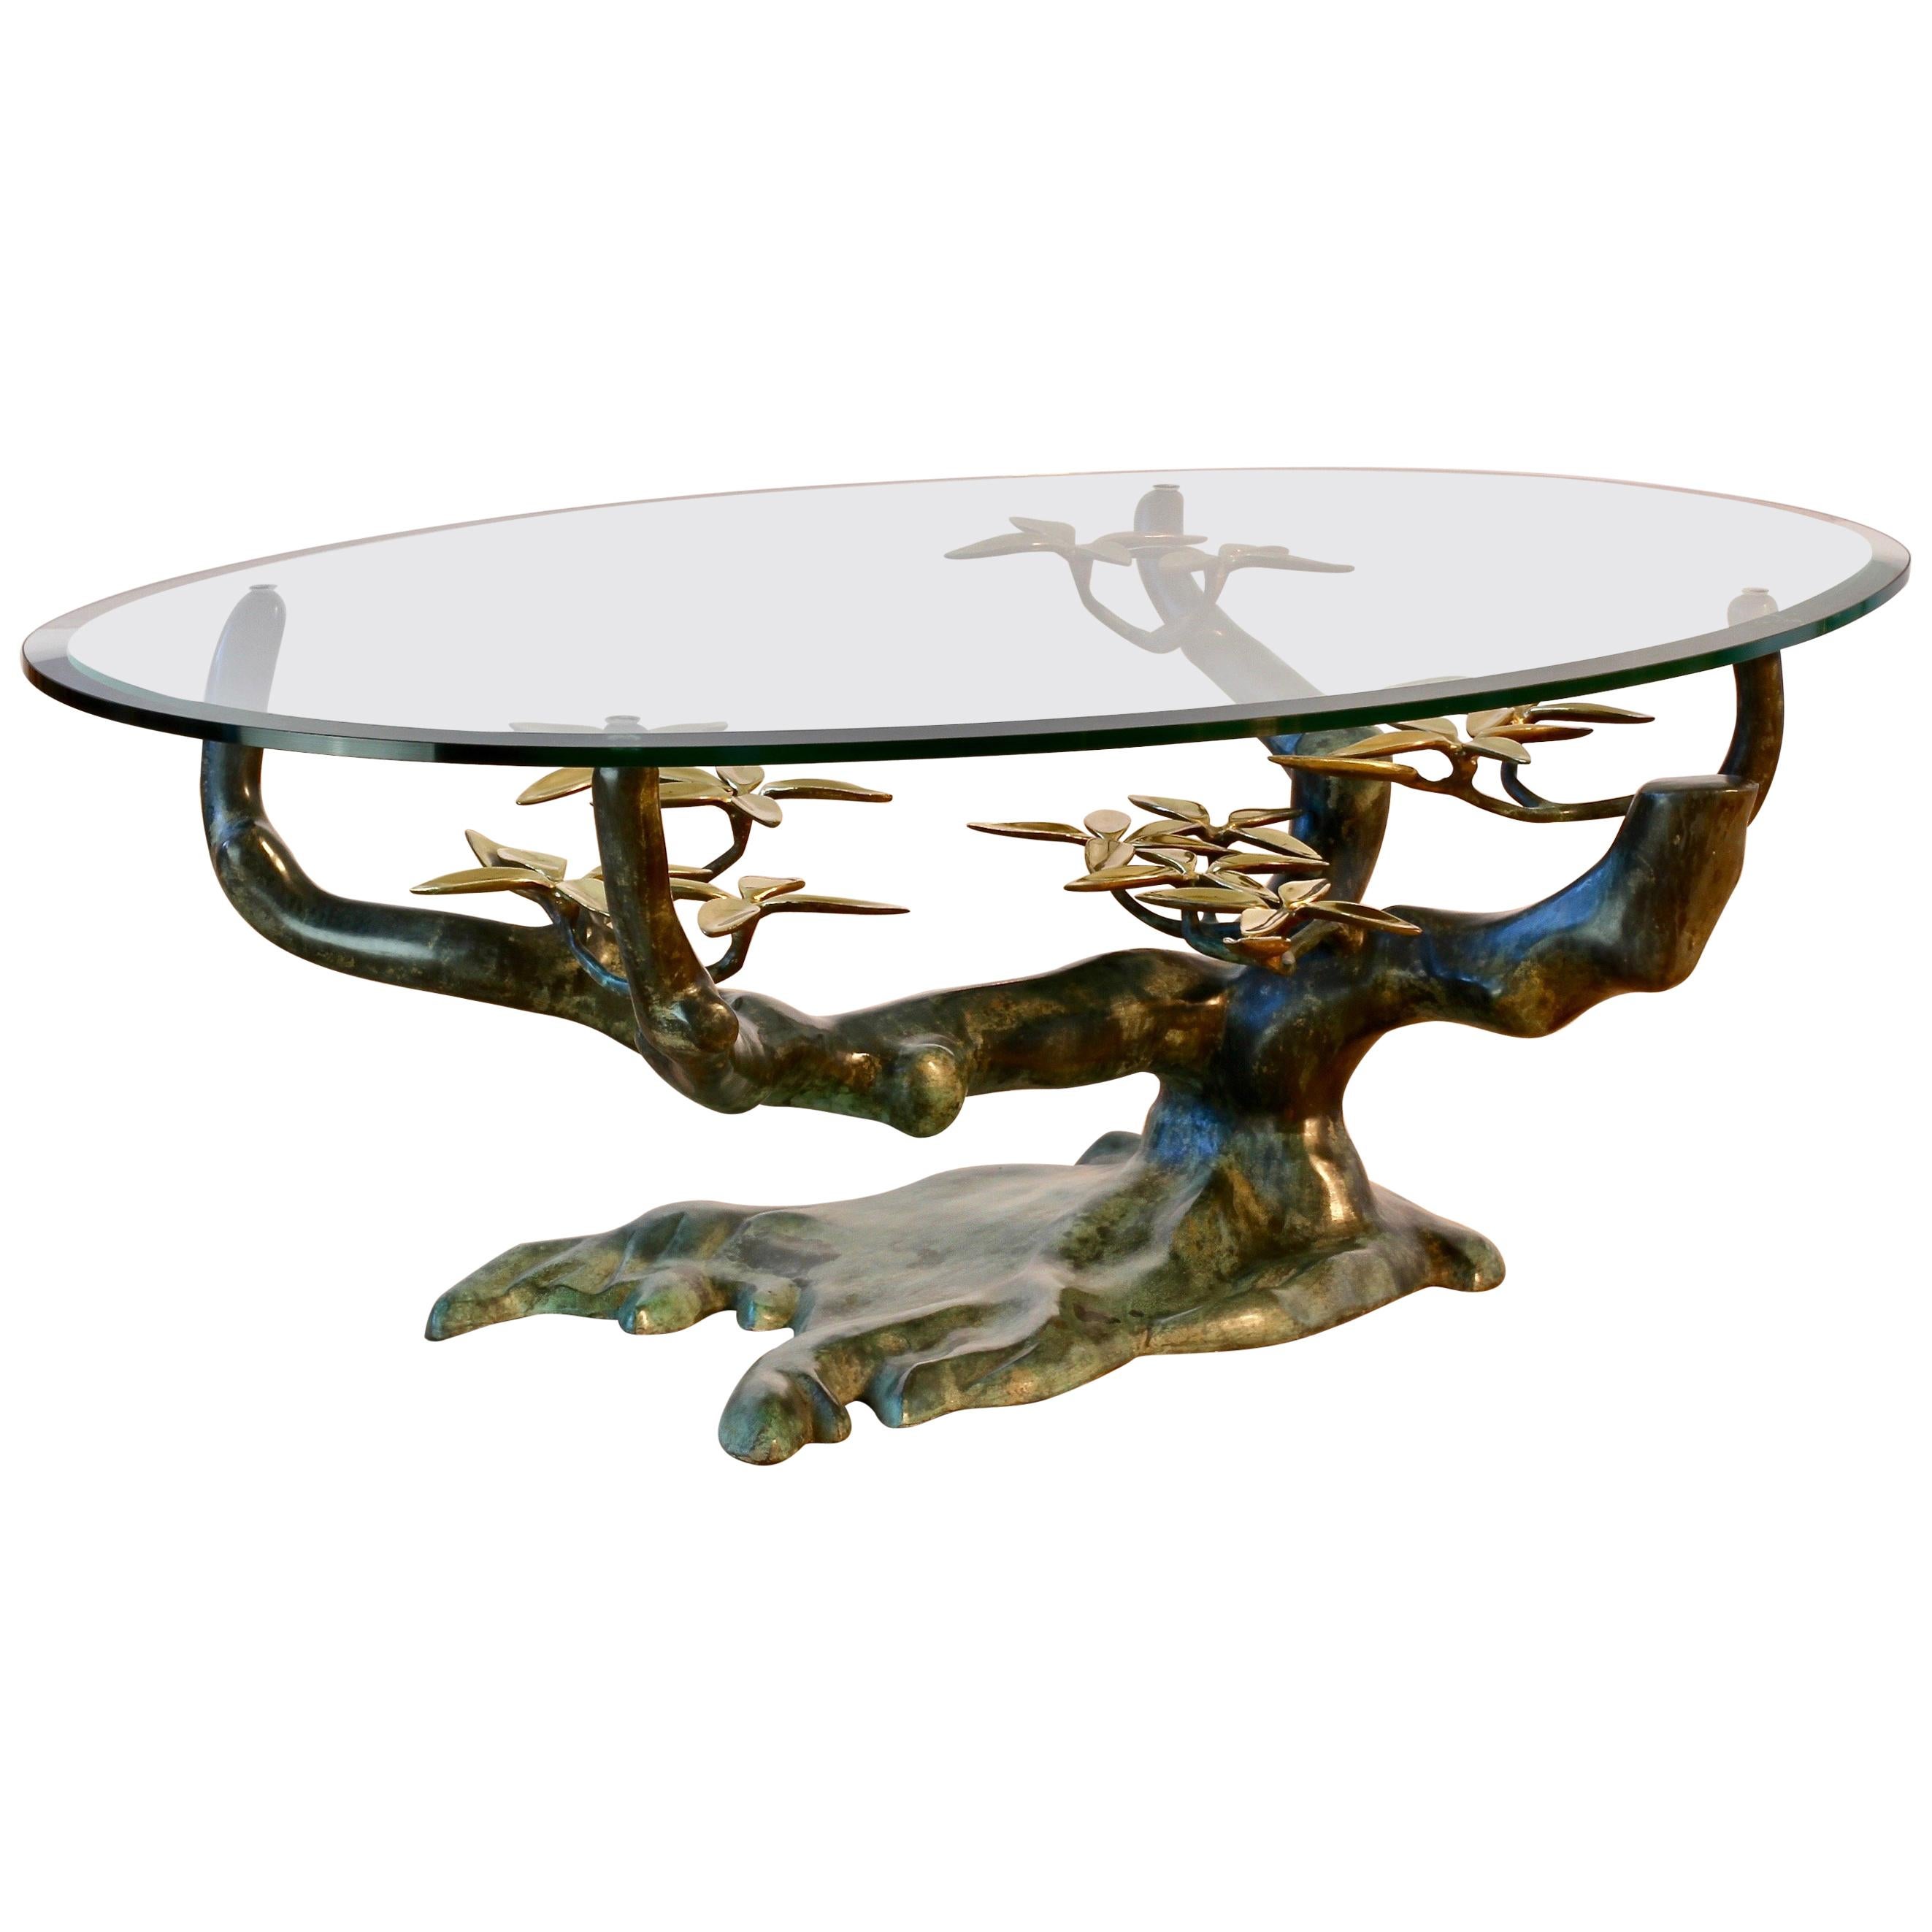 Cast Patinated Brass and Glass 'Bonsai' Tree Form Coffee Table c.1980s Belgium